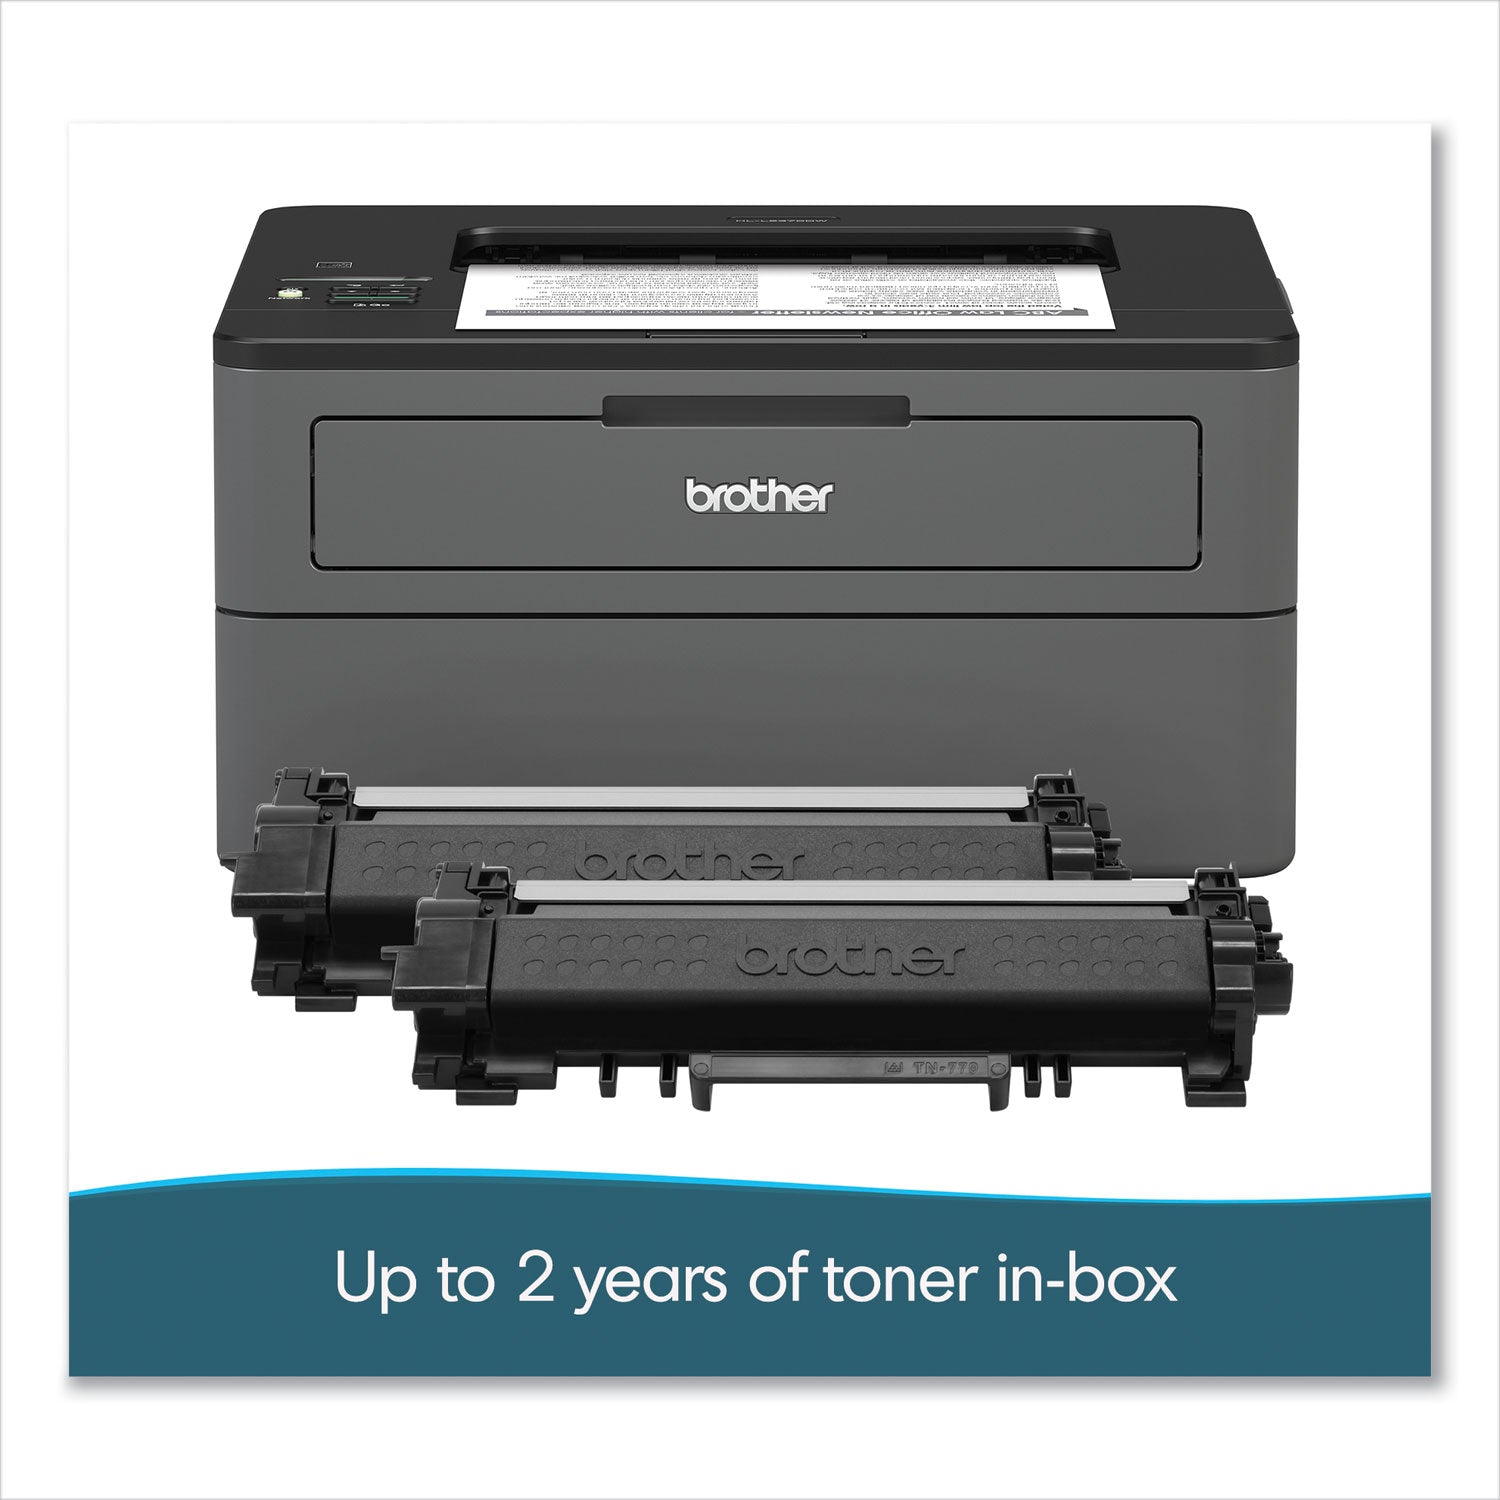 hll2370dwxl-xl-extended-print-monochrome-compact-laser-printer-with-up-to-2-years-of-toner-in-box_brthll2370dwxl - 4